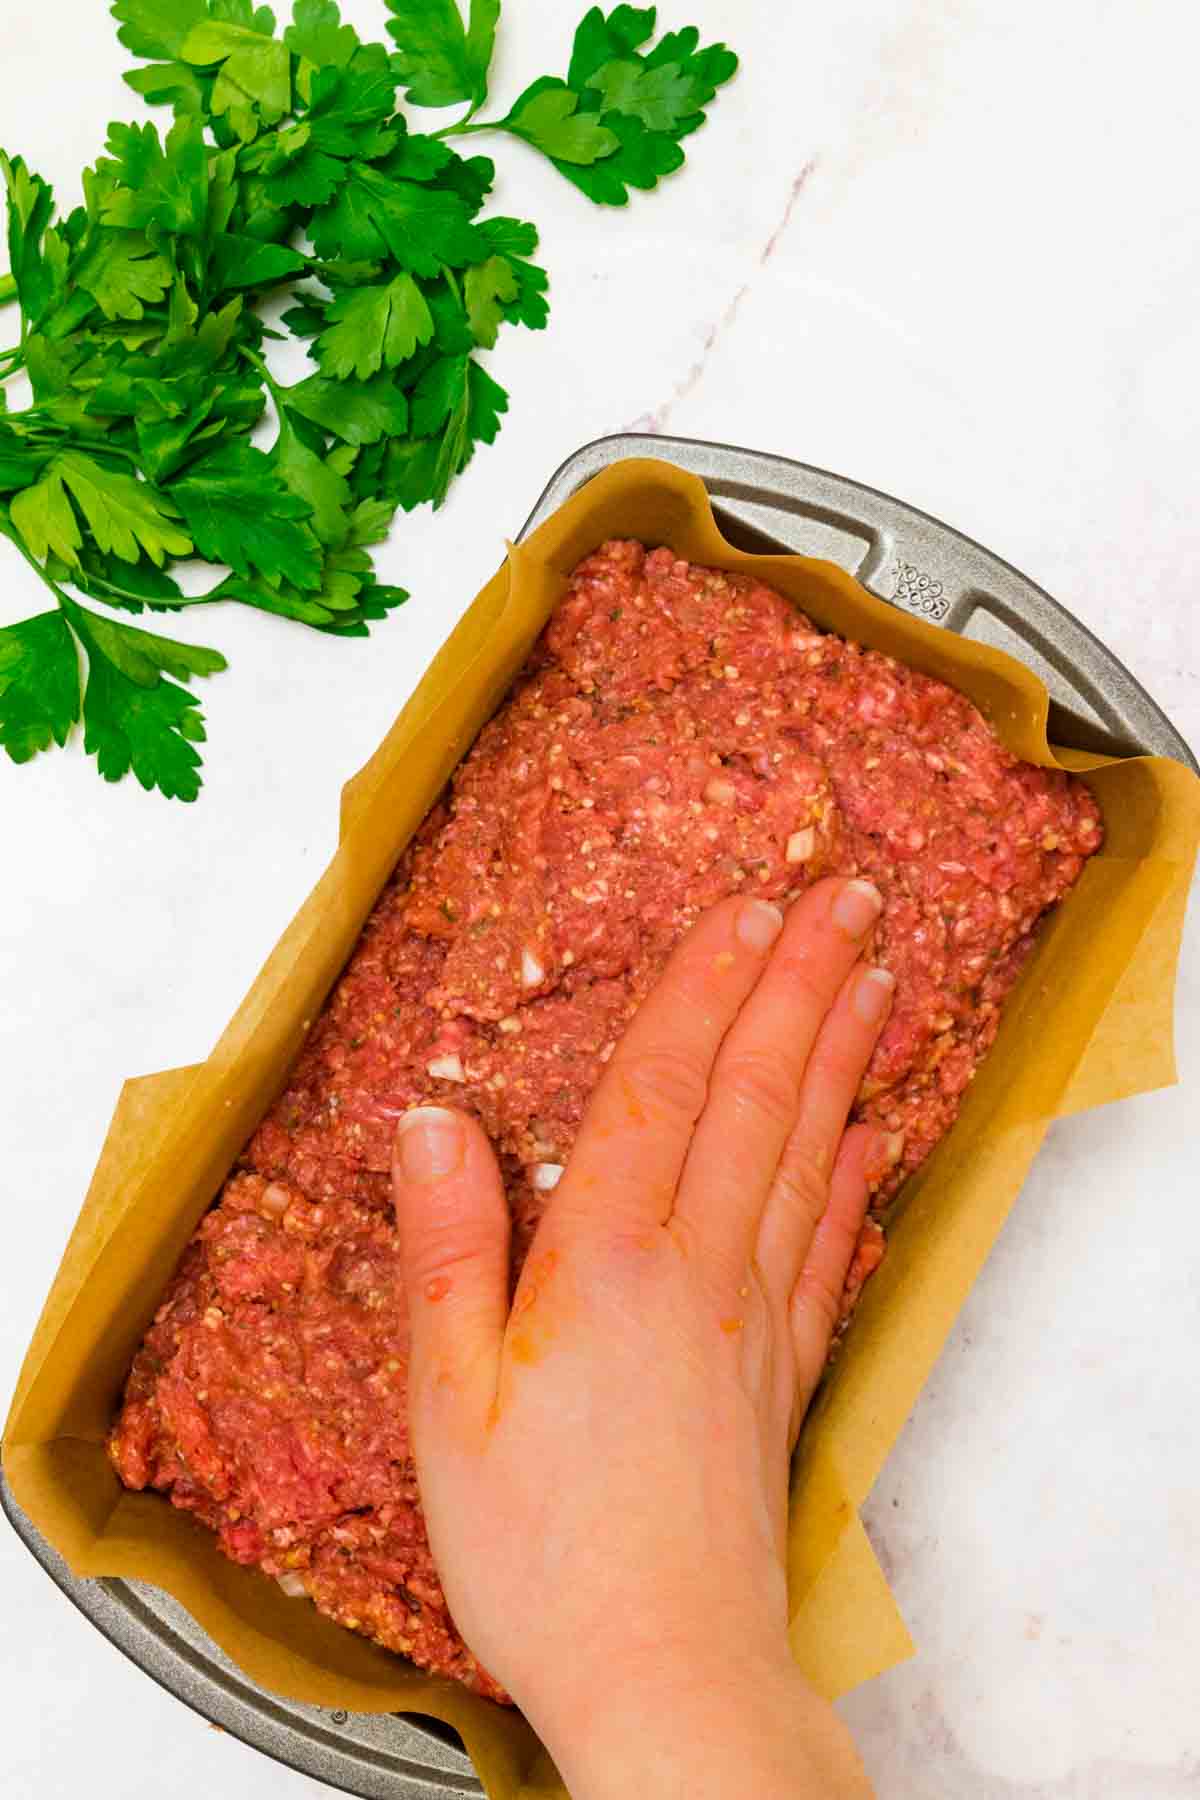 A hand presses the meatloaf mixture into a rectangular baking pan lined with parchment paper.